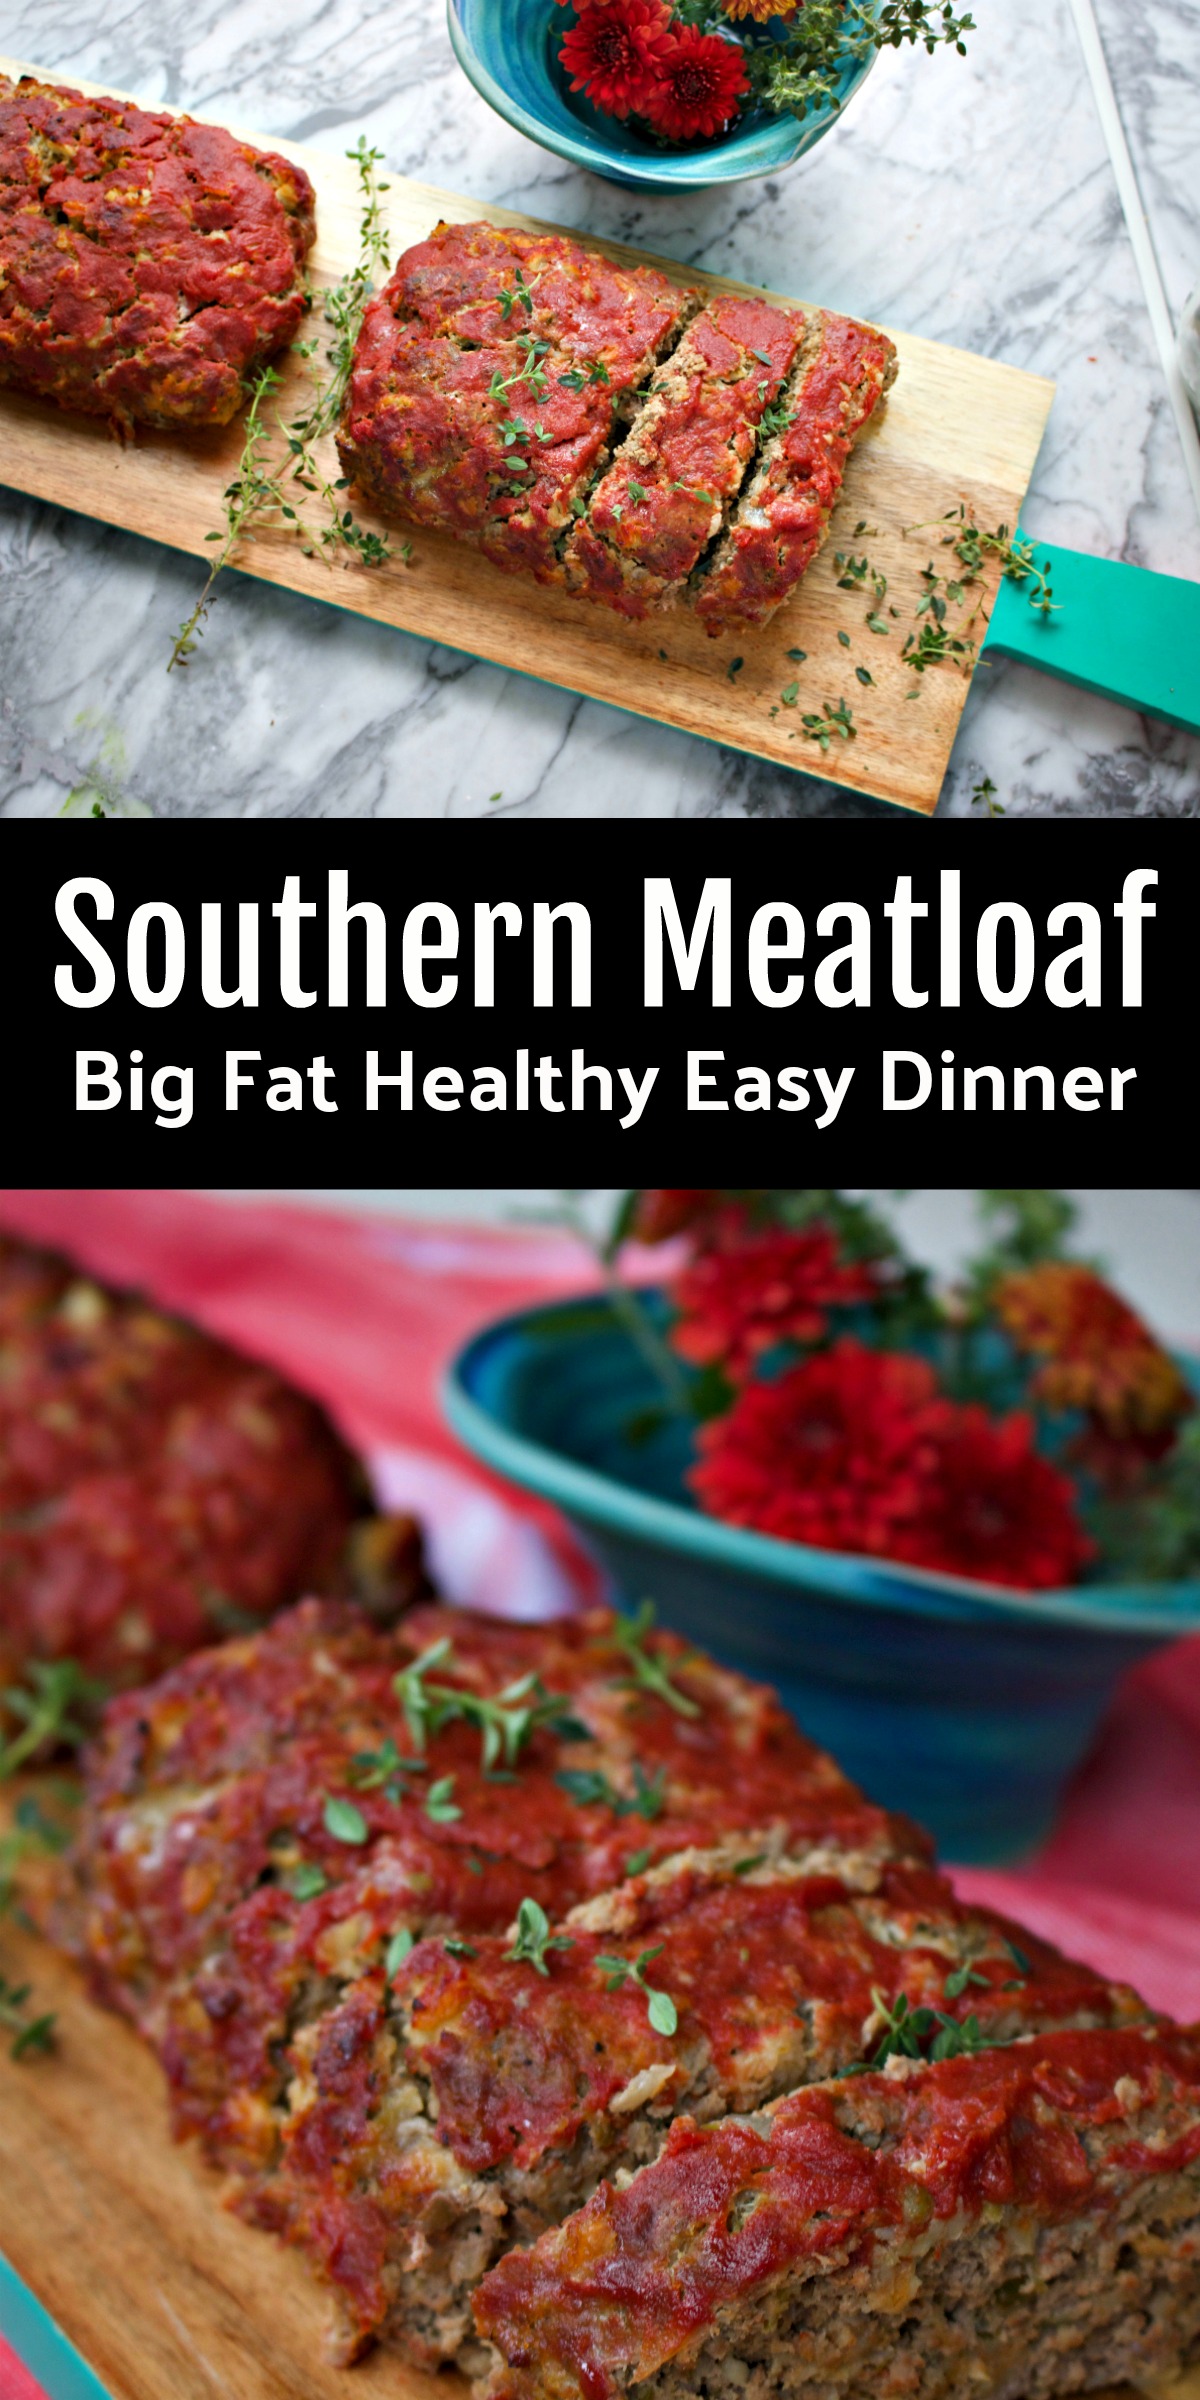 Southern Meatloaf made with sauteed veggies, oats and is old family recipe. Makes great leftovers too. via @angelaroberts